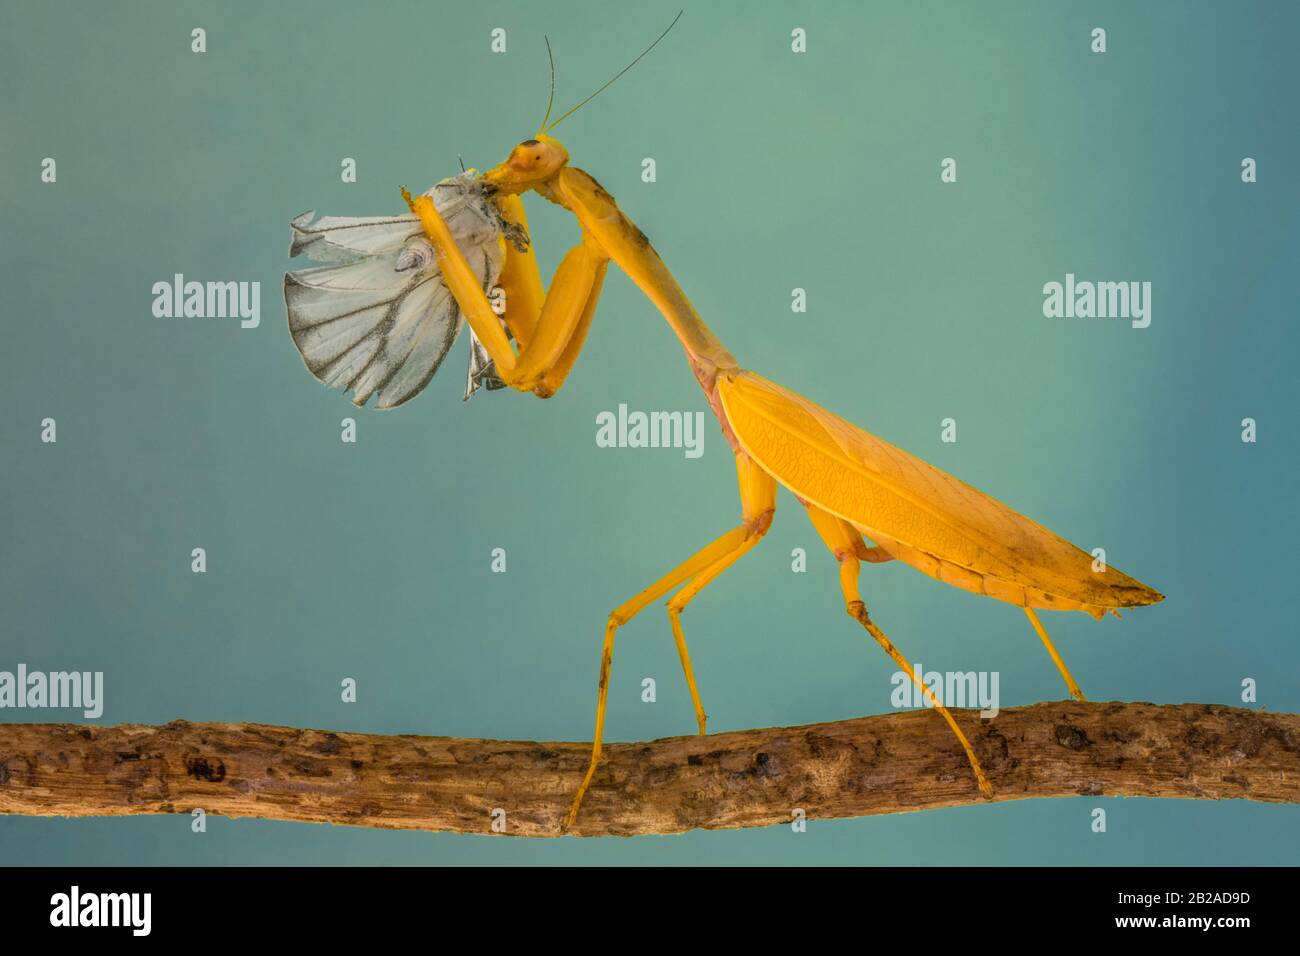 Portrait of a mantis standing on a branch eating a butterfly, Indonesia Stock Photo